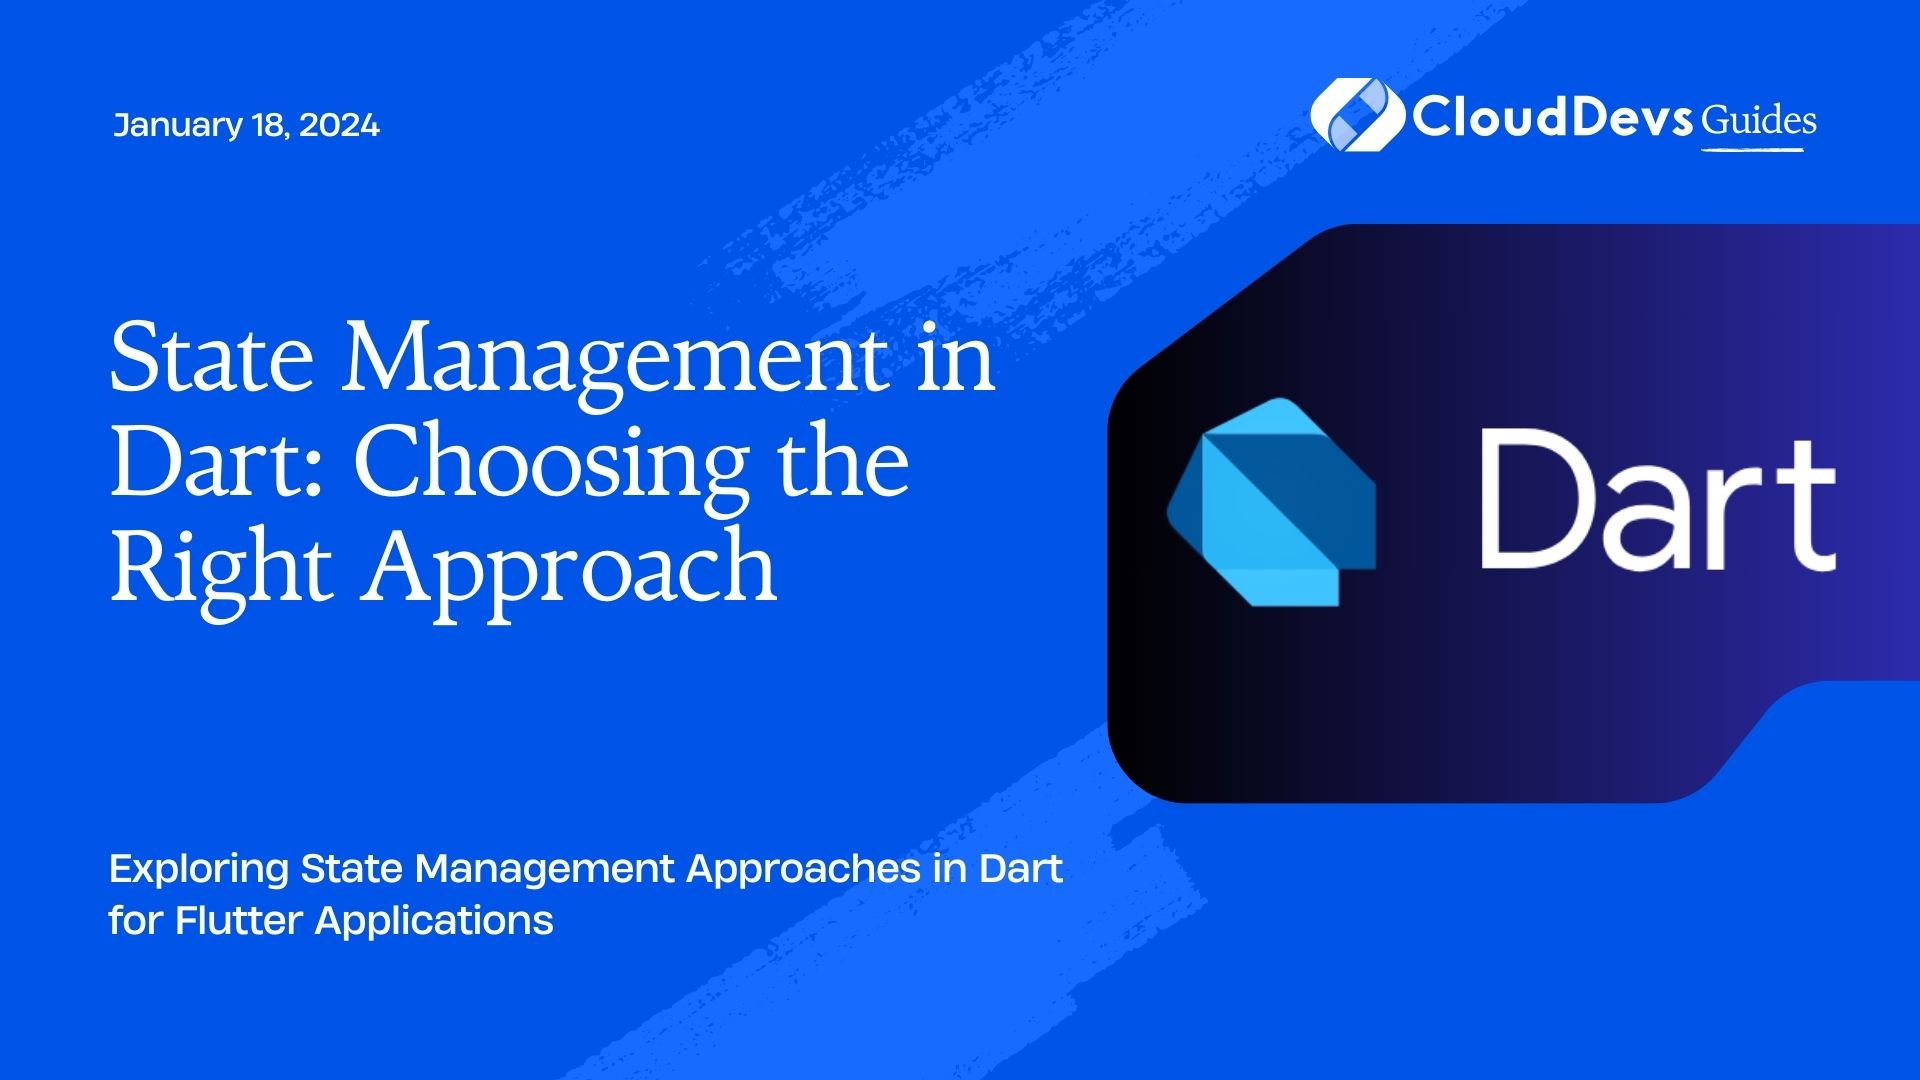 State Management in Dart: Choosing the Right Approach